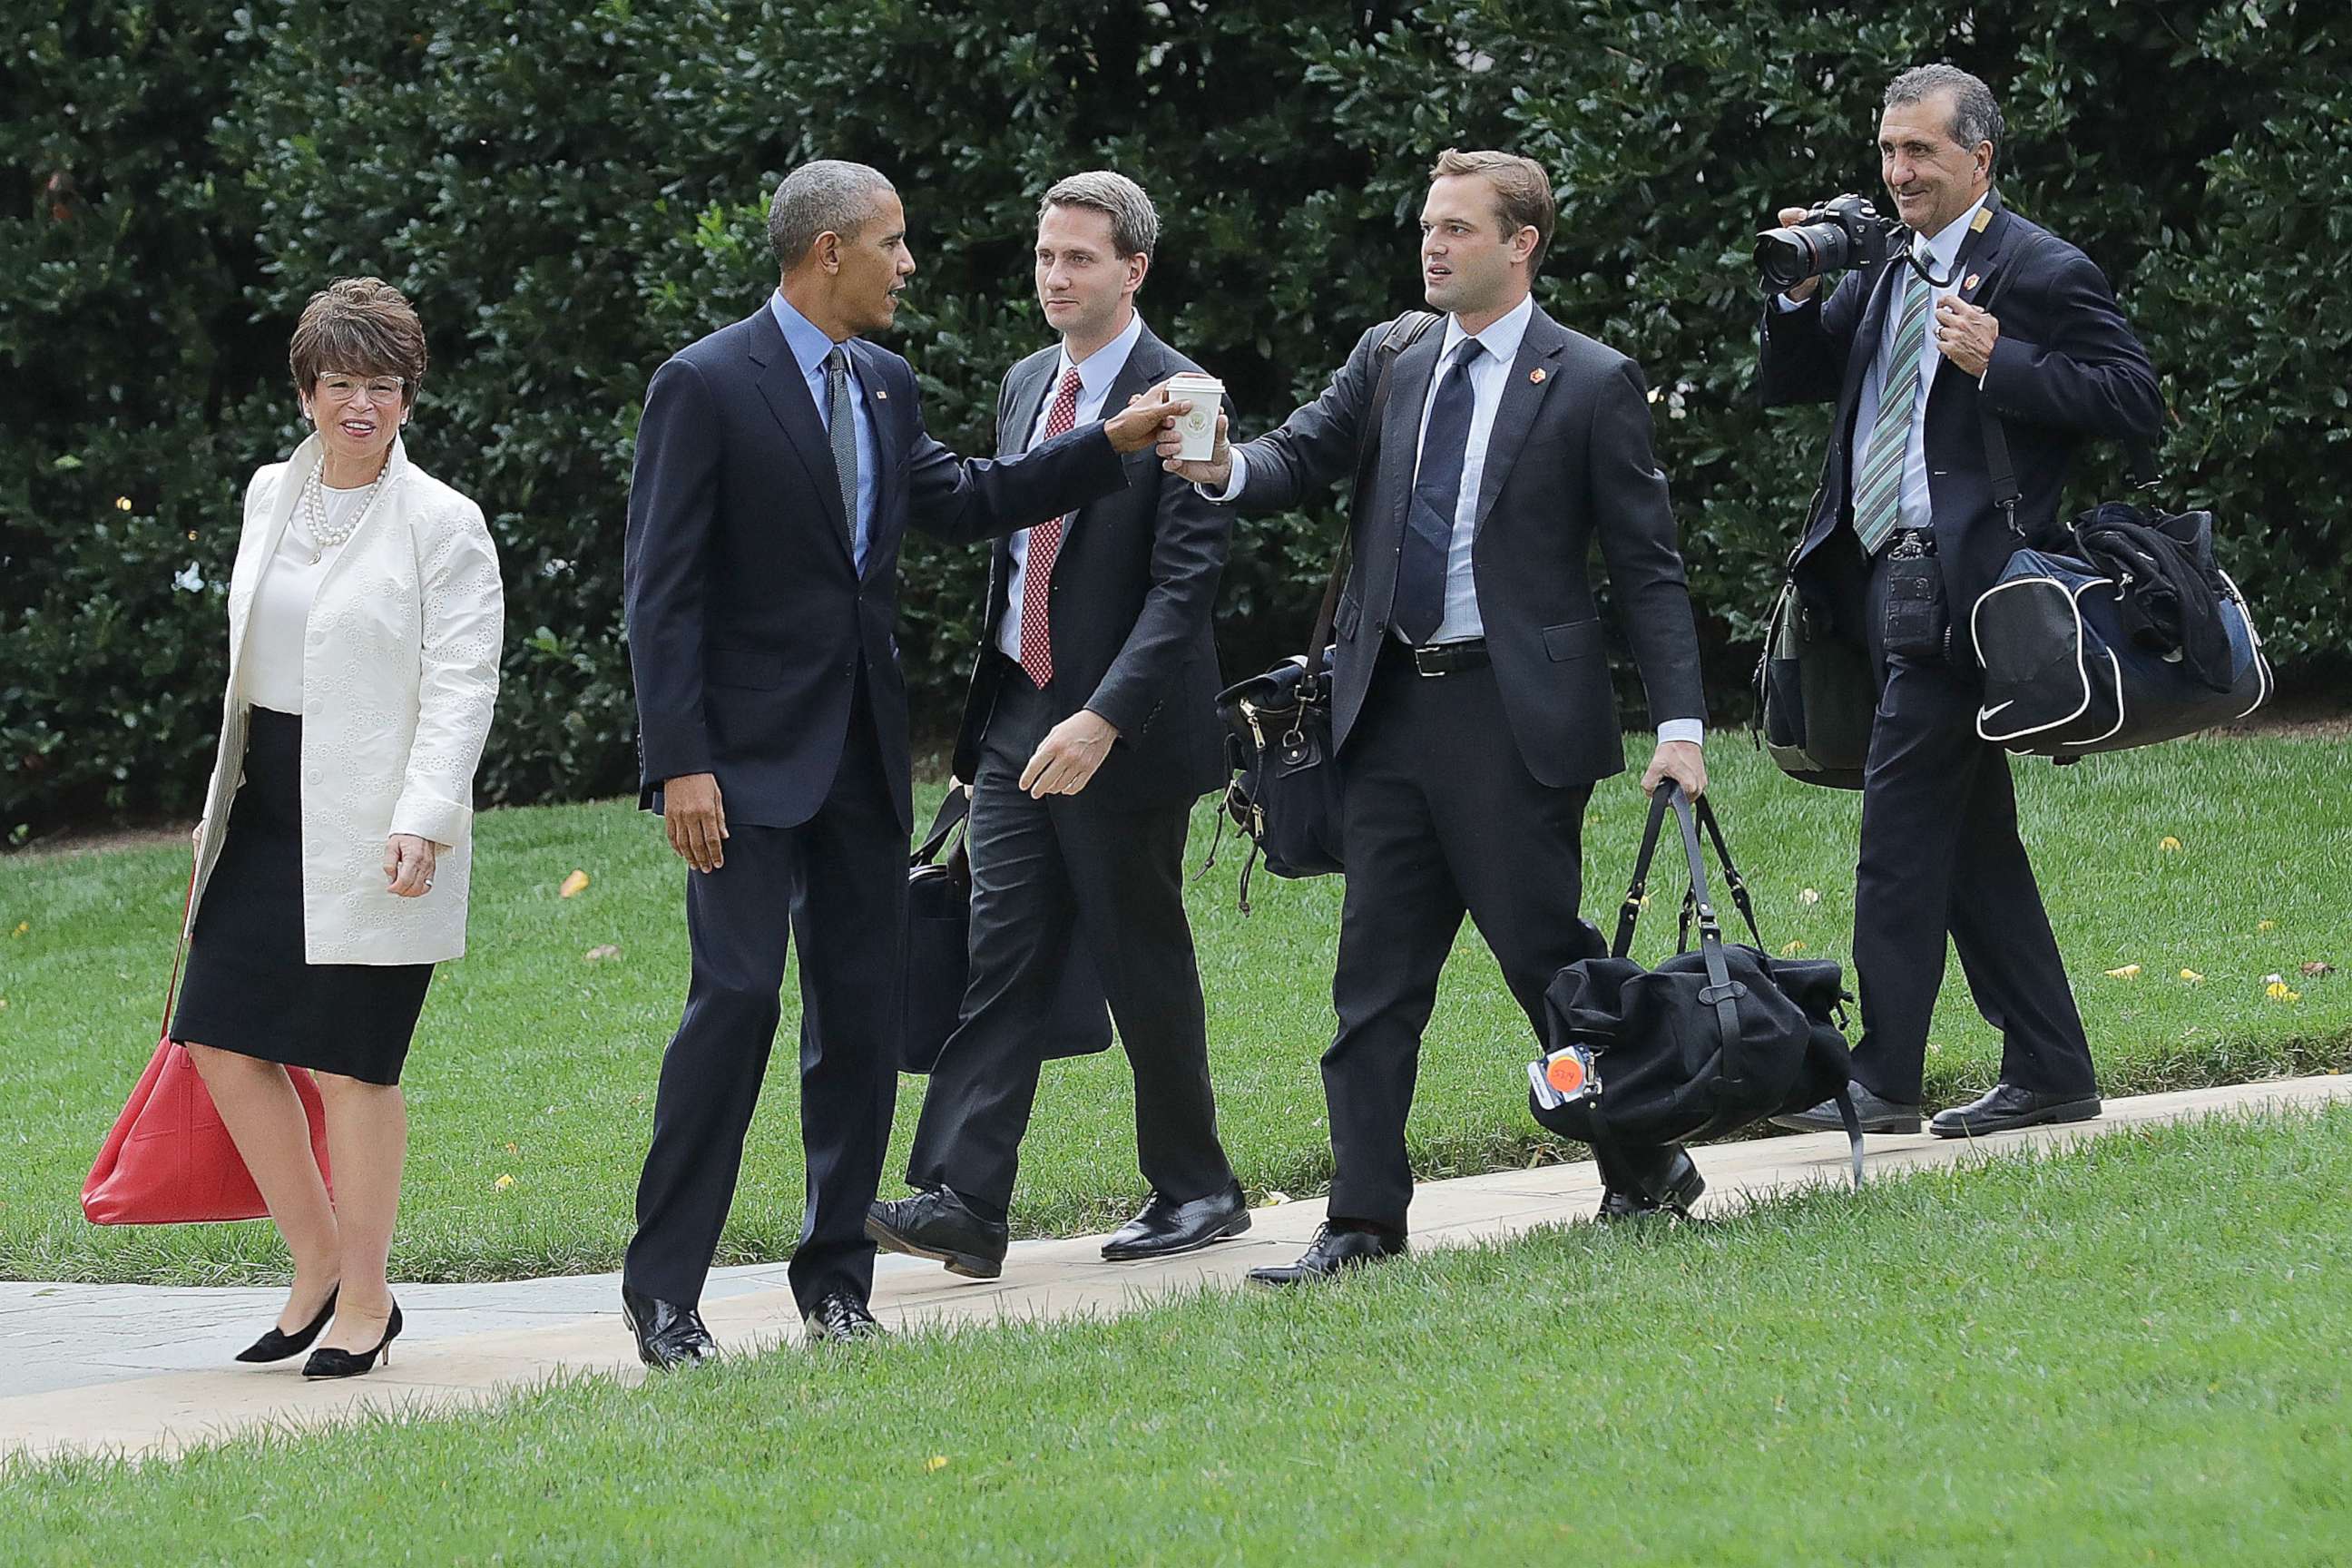 PHOTO: In this file photo, President Barack Obama is joined by advisor Valerie Jarrett, Principal Deputy Press Secretary Eric Schultz, personal aide Joe Paulsen and photographer Pete Souza as they depart the White House, Oct. 7, 2016, in Washington, DC.